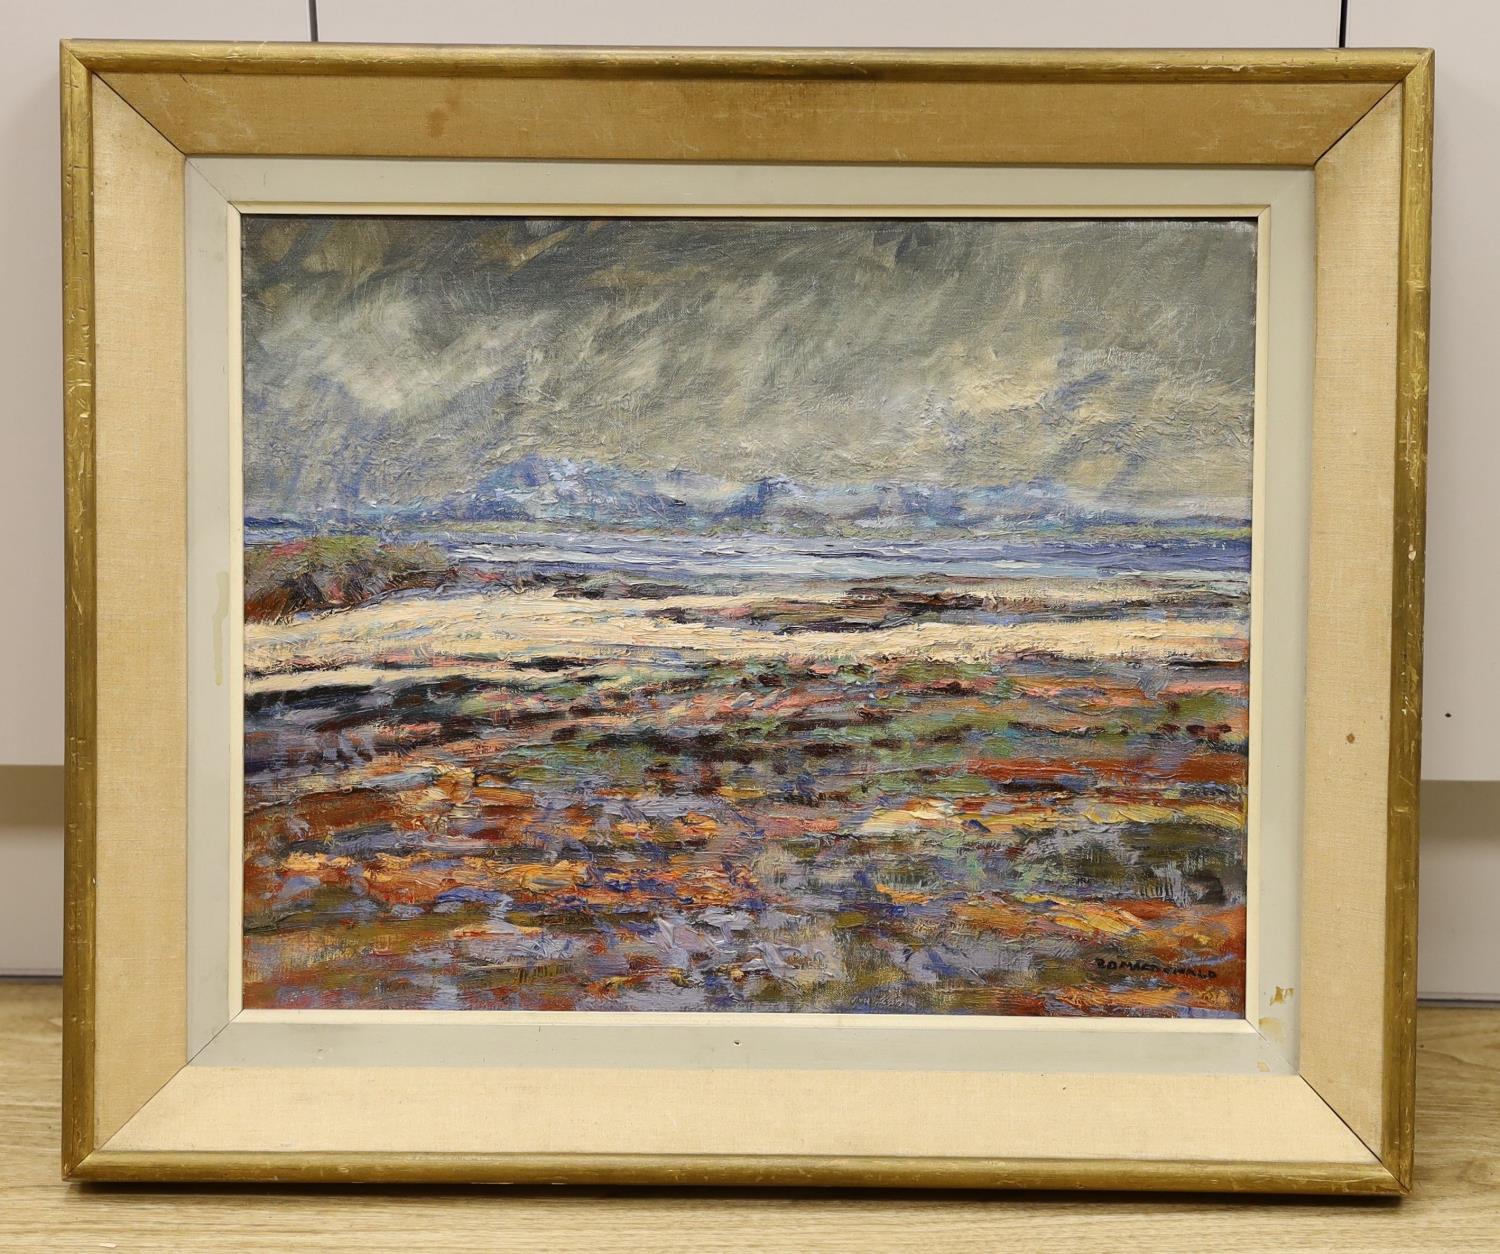 Sir Roderick Macdonald (1921-2001), oil on canvas, 'Low water, Loch Snizort, Skye', signed, 40 x - Image 2 of 4